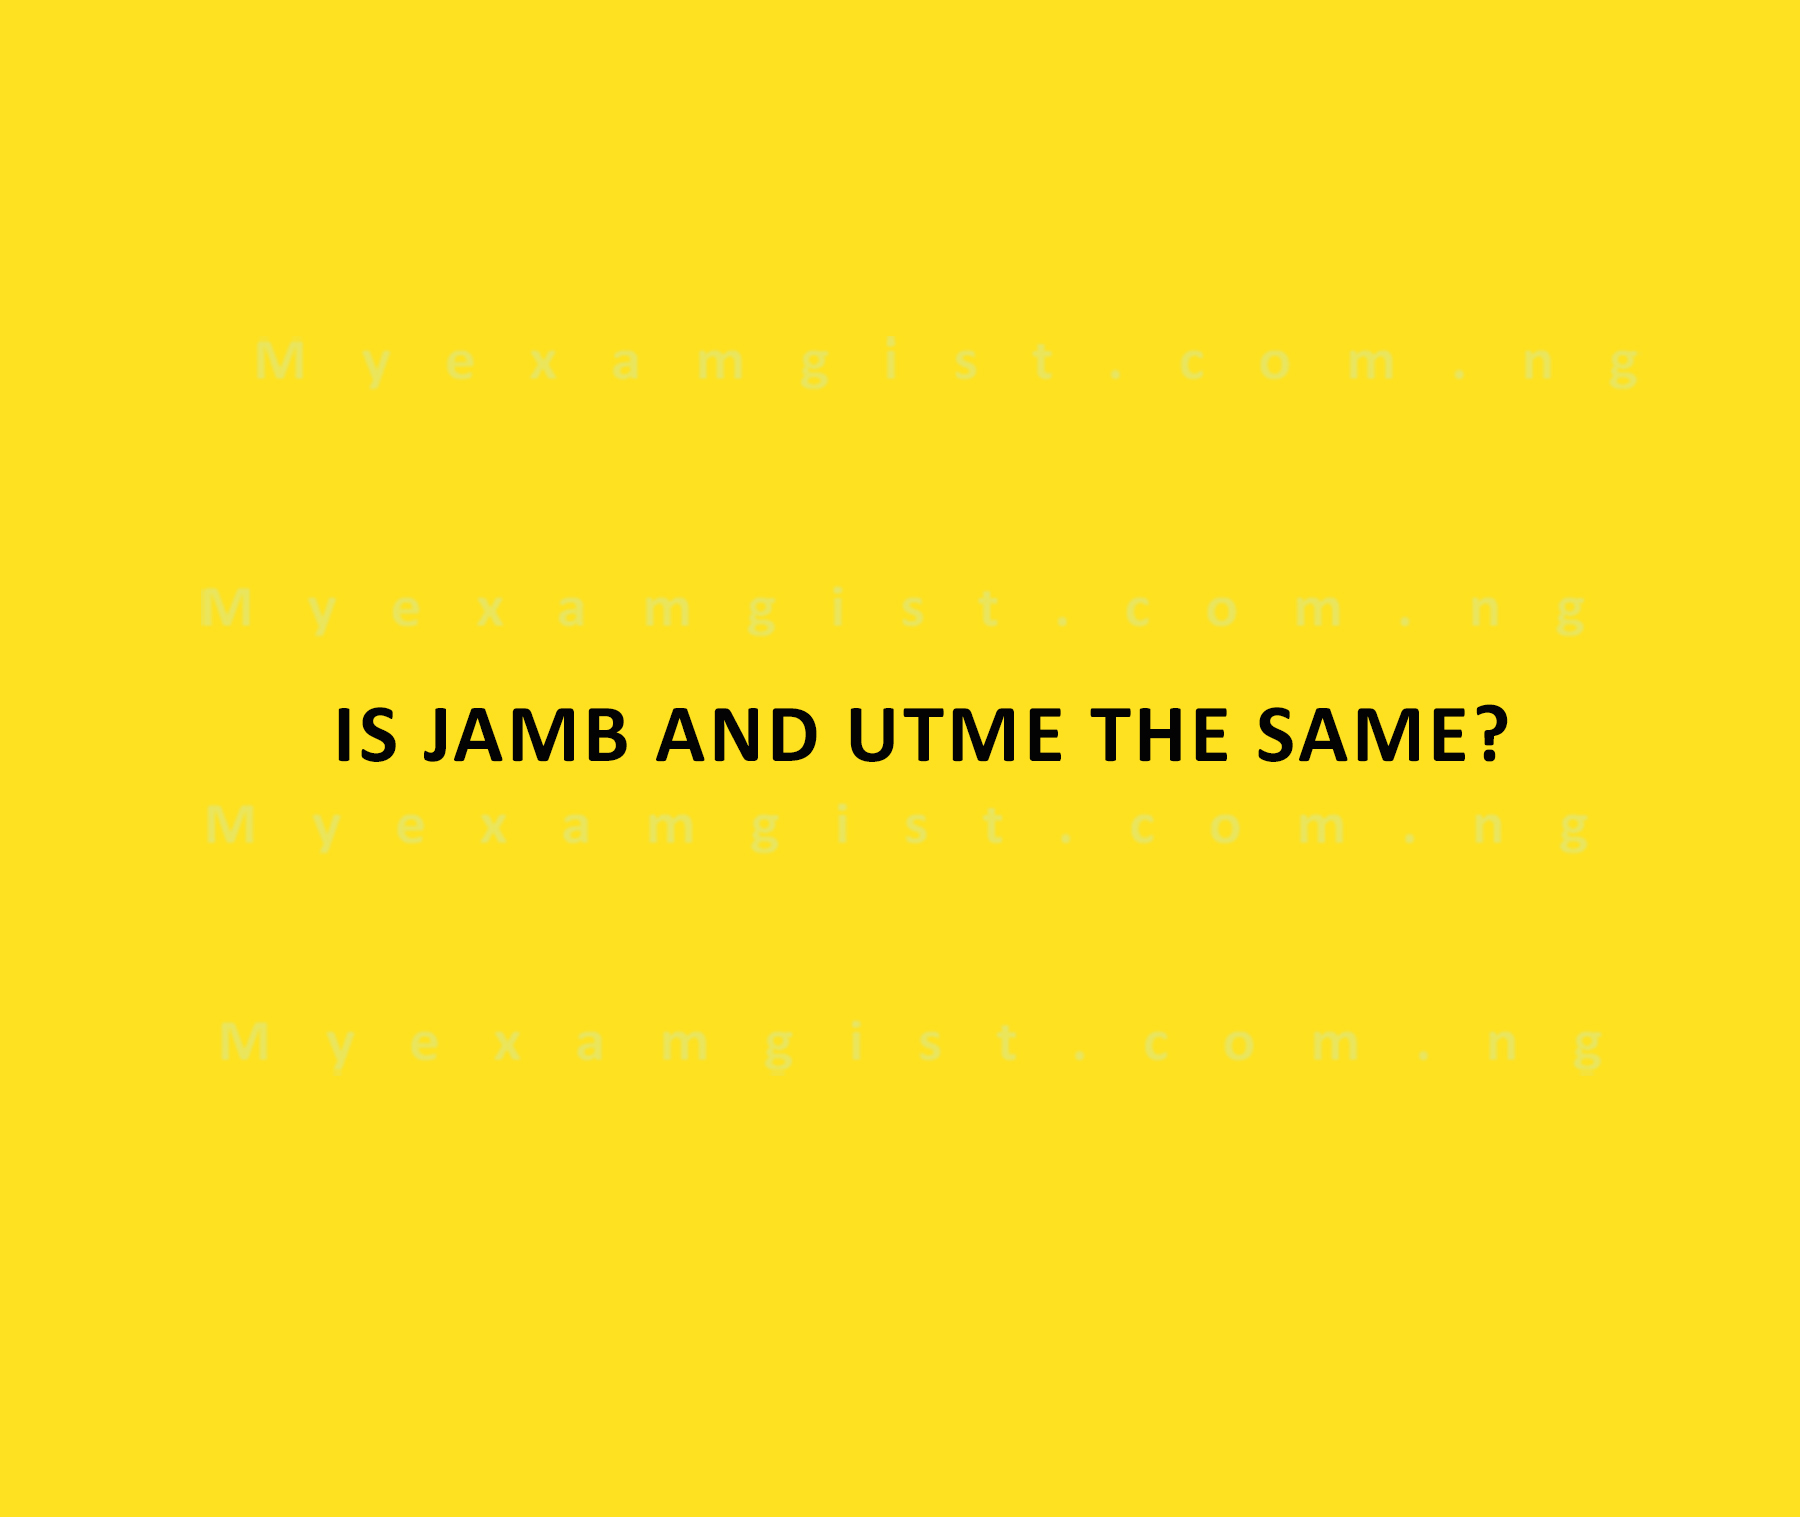 Is JAMB and UTME the same